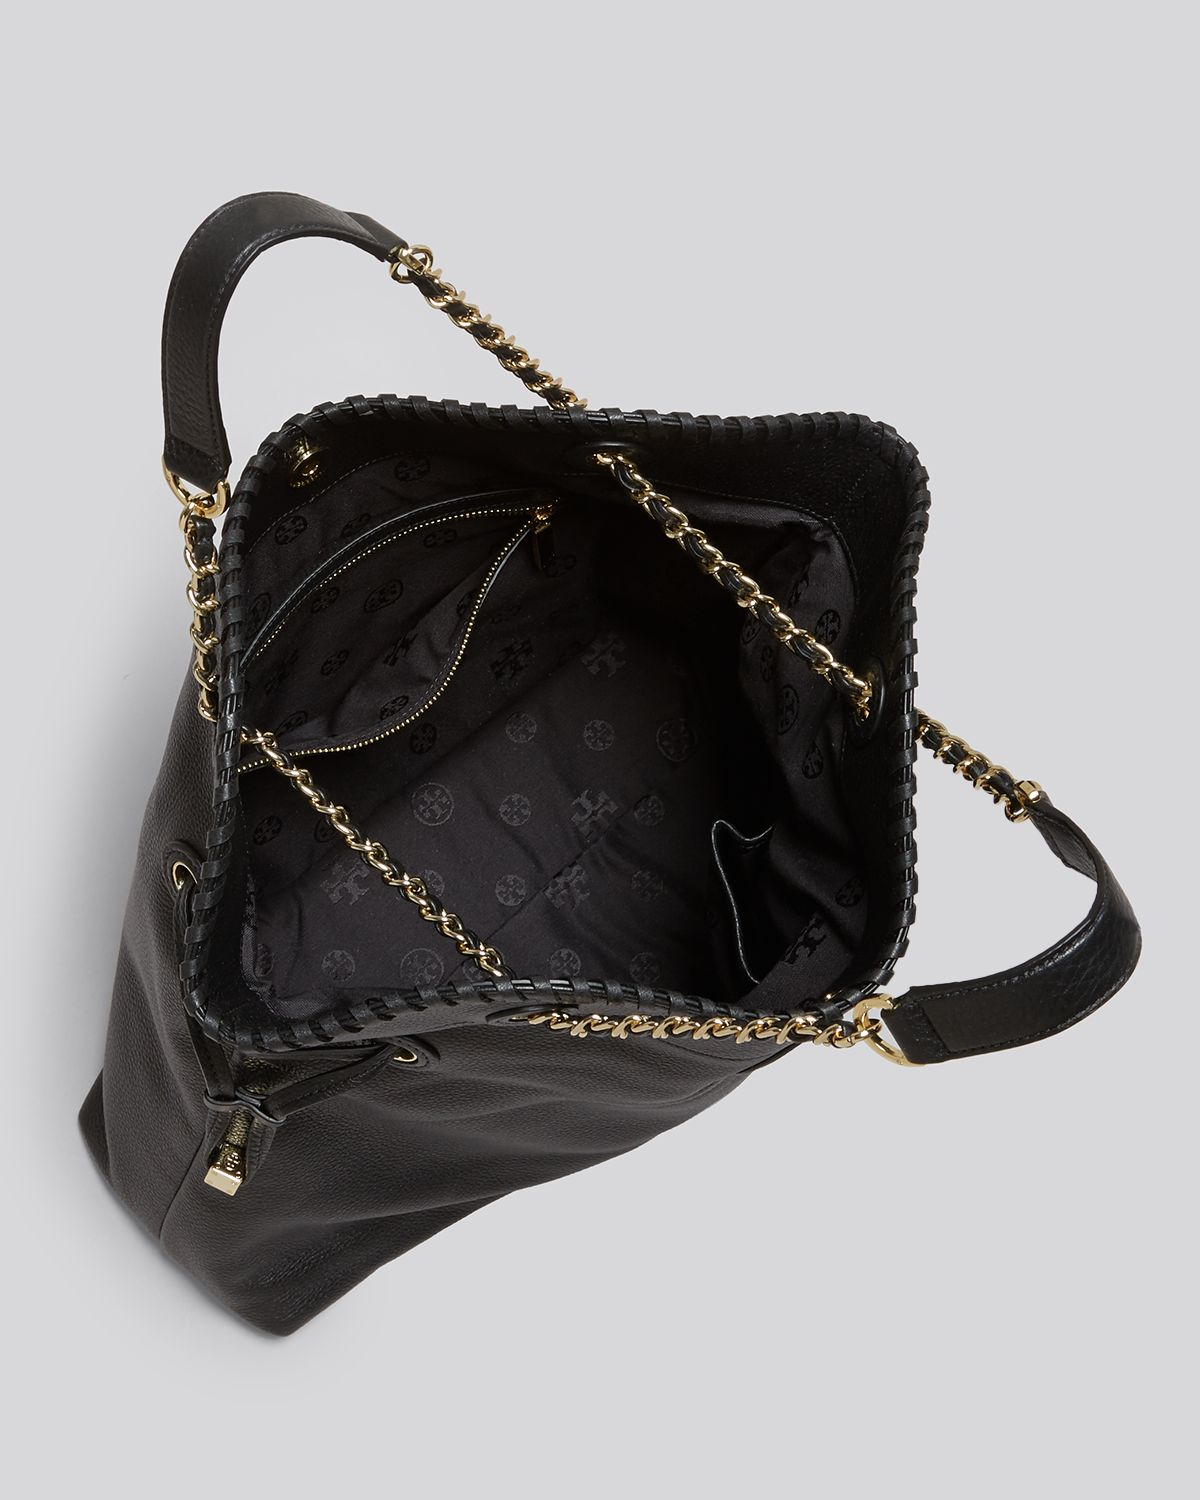 Tory Burch Tote - Marion Large Slouchy in Black | Lyst